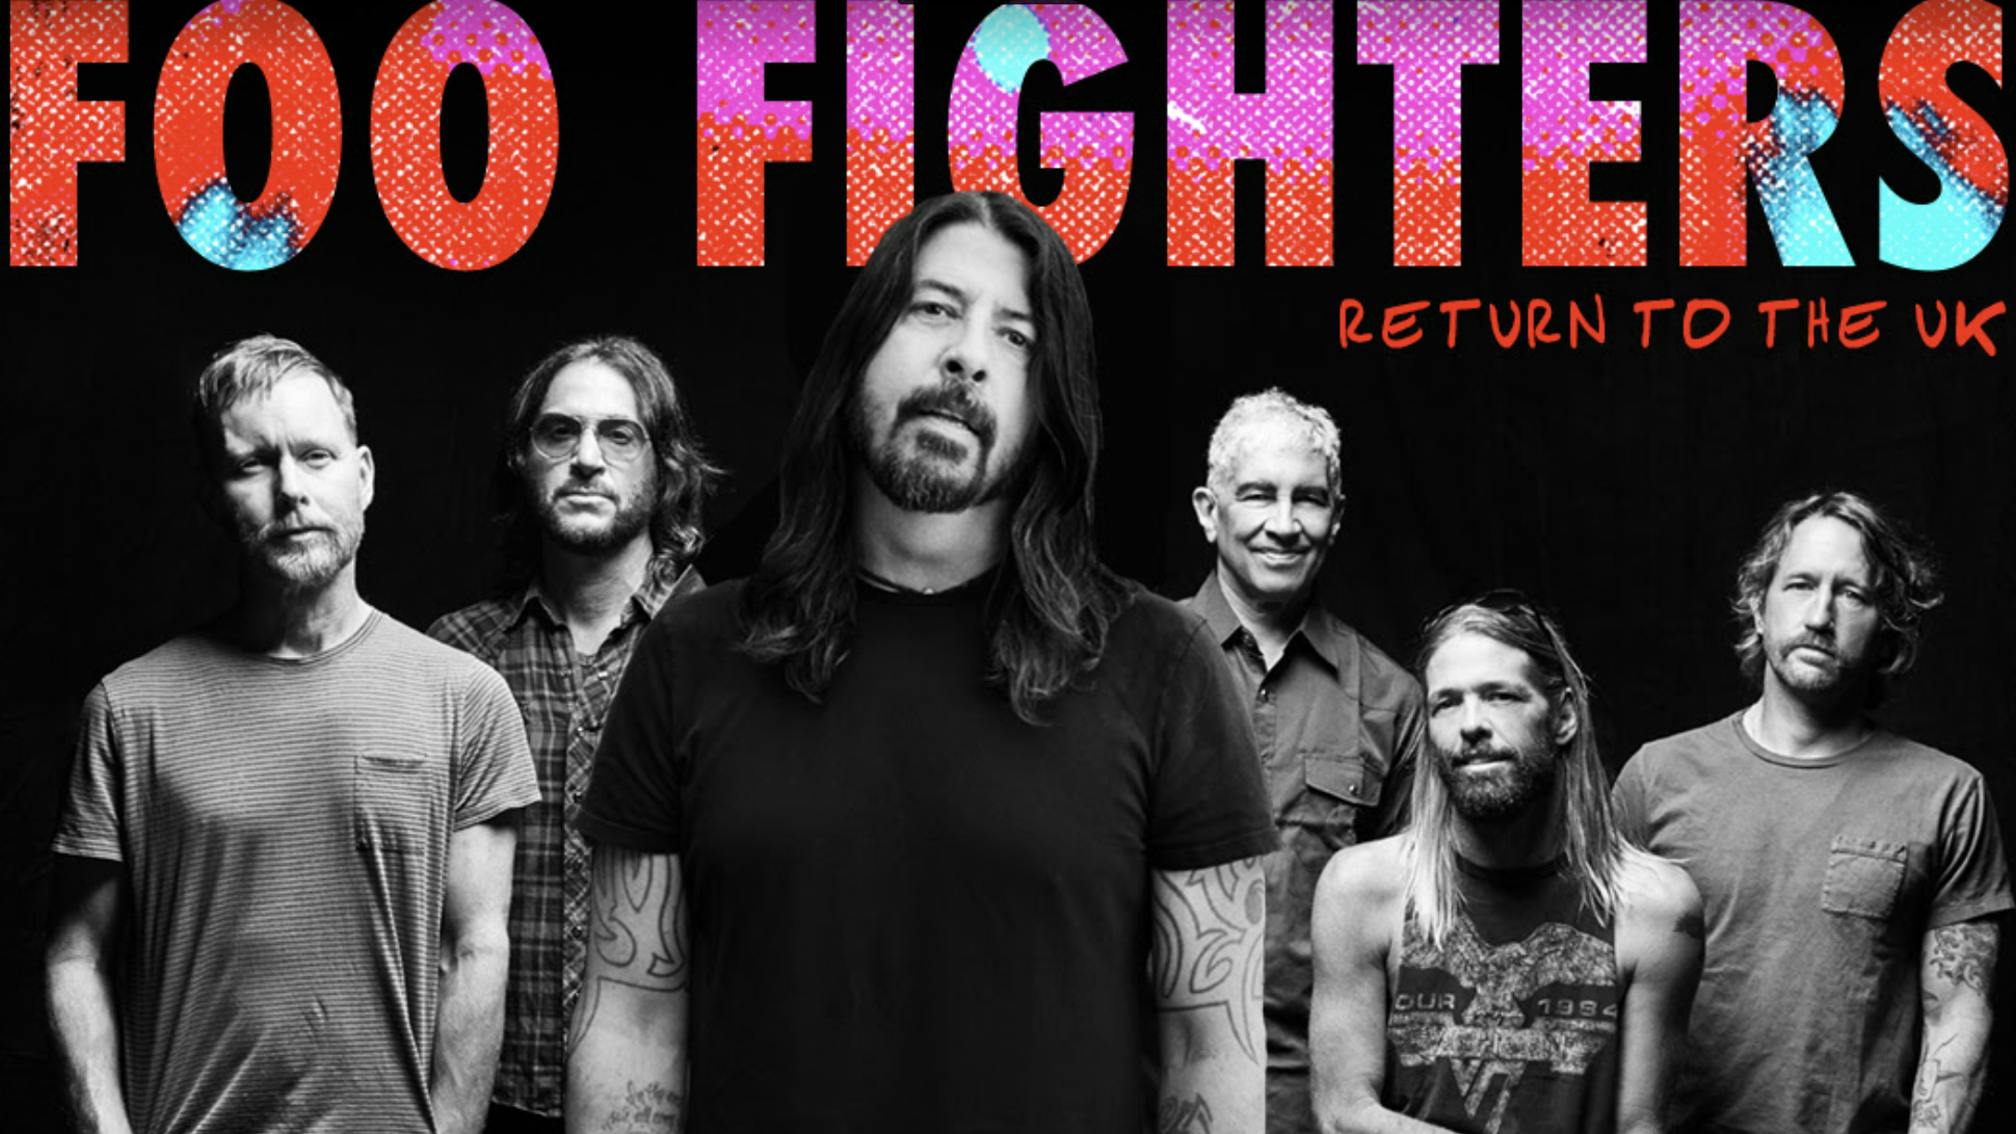 Foo Fighters announce 2022 UK stadium shows